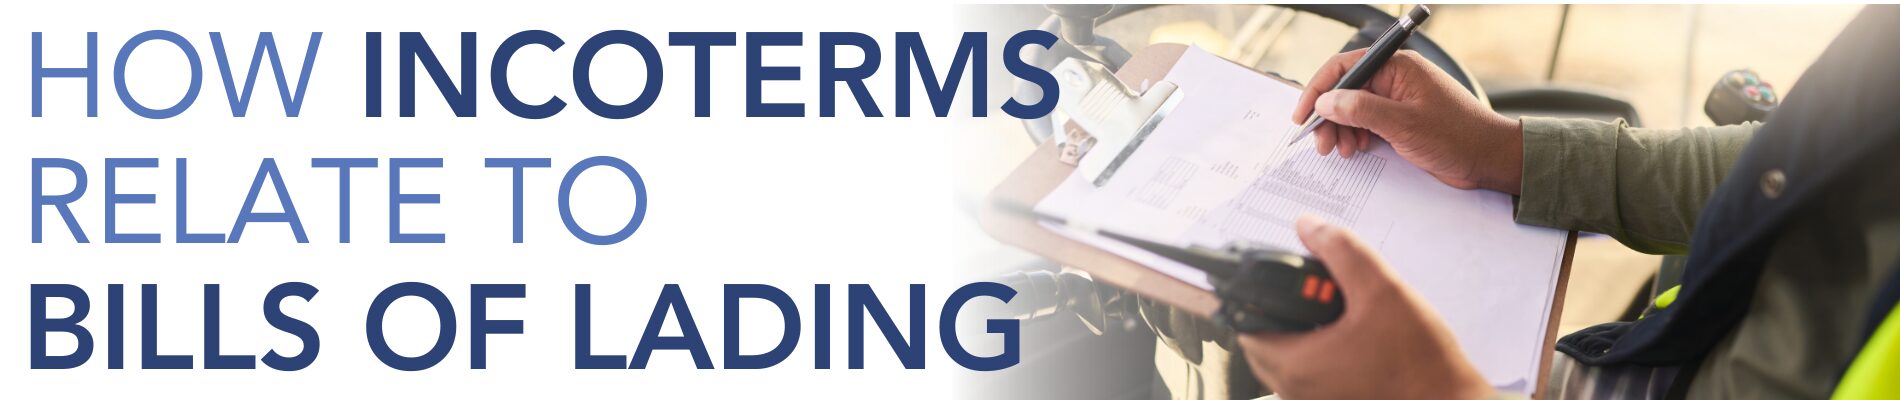 Incoterms and Bills of Lading Header